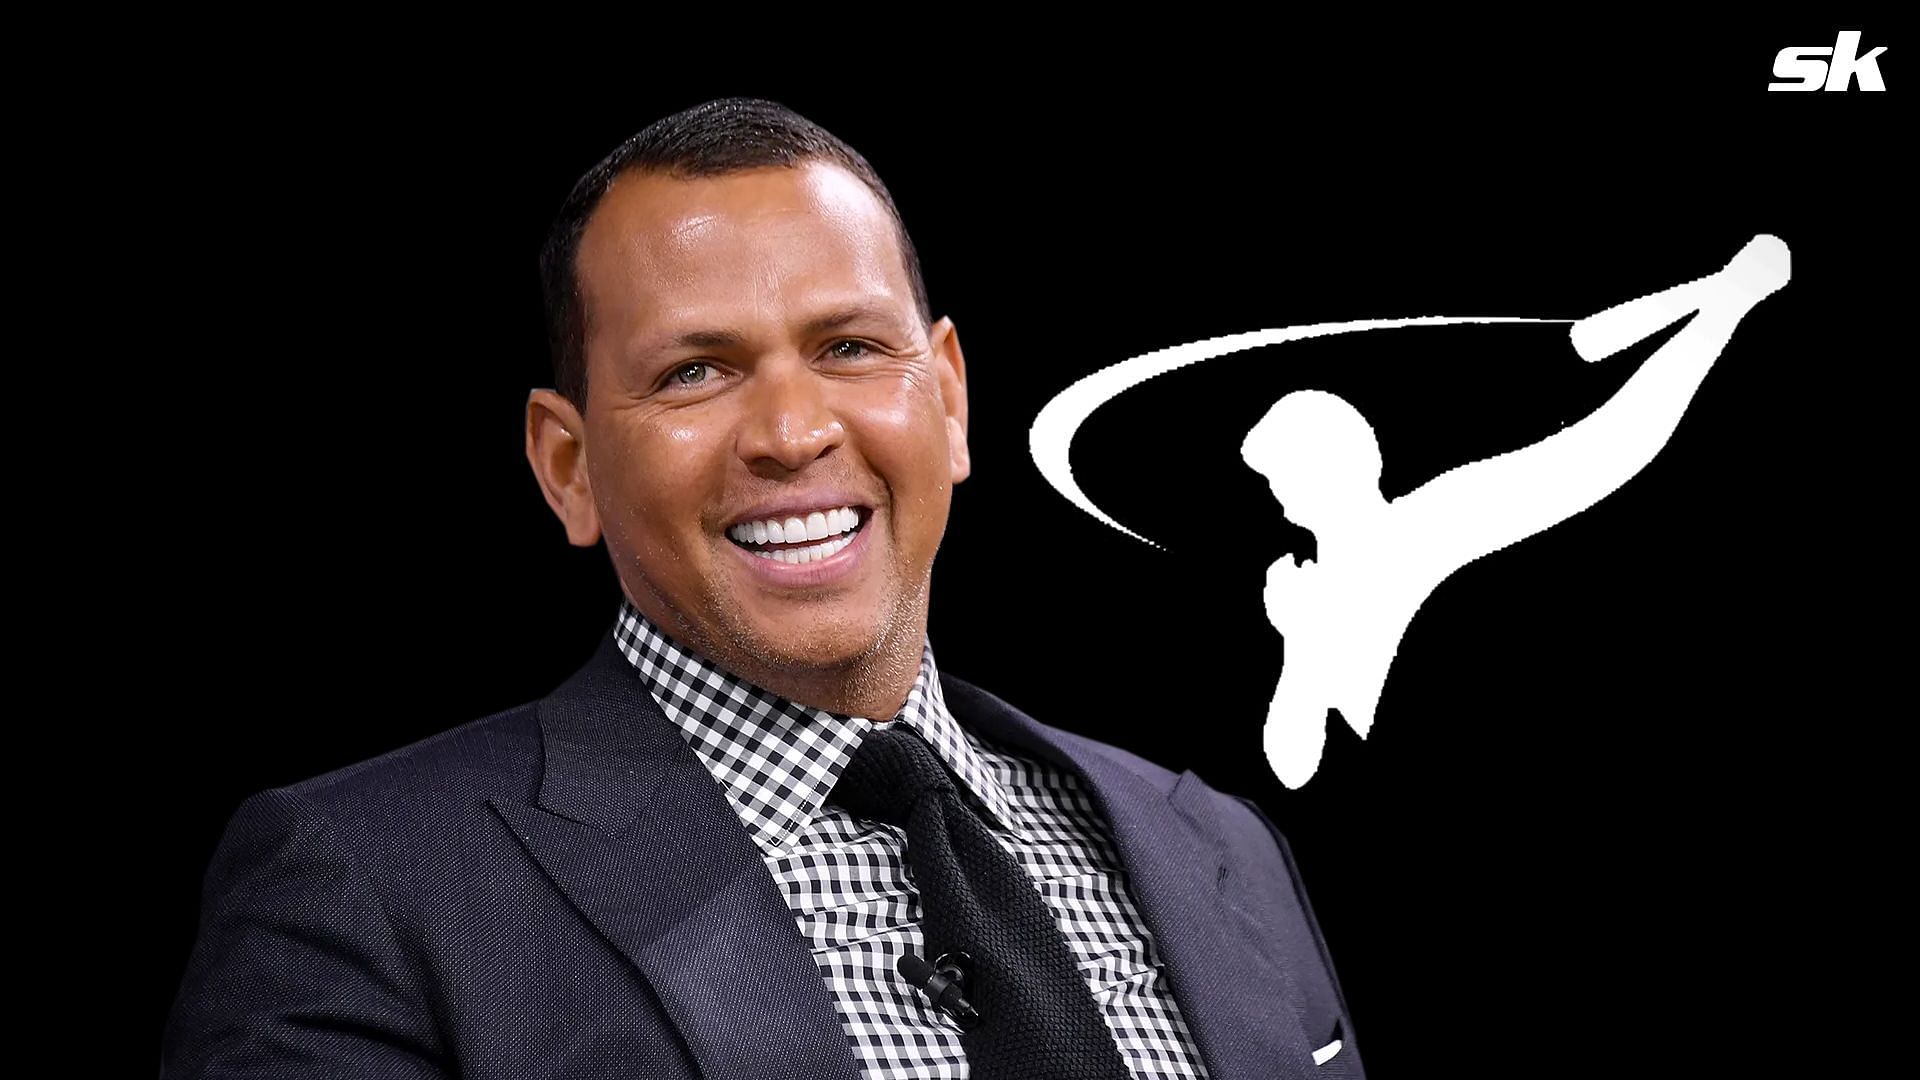 Alex Rodriguez owns many successful businesses